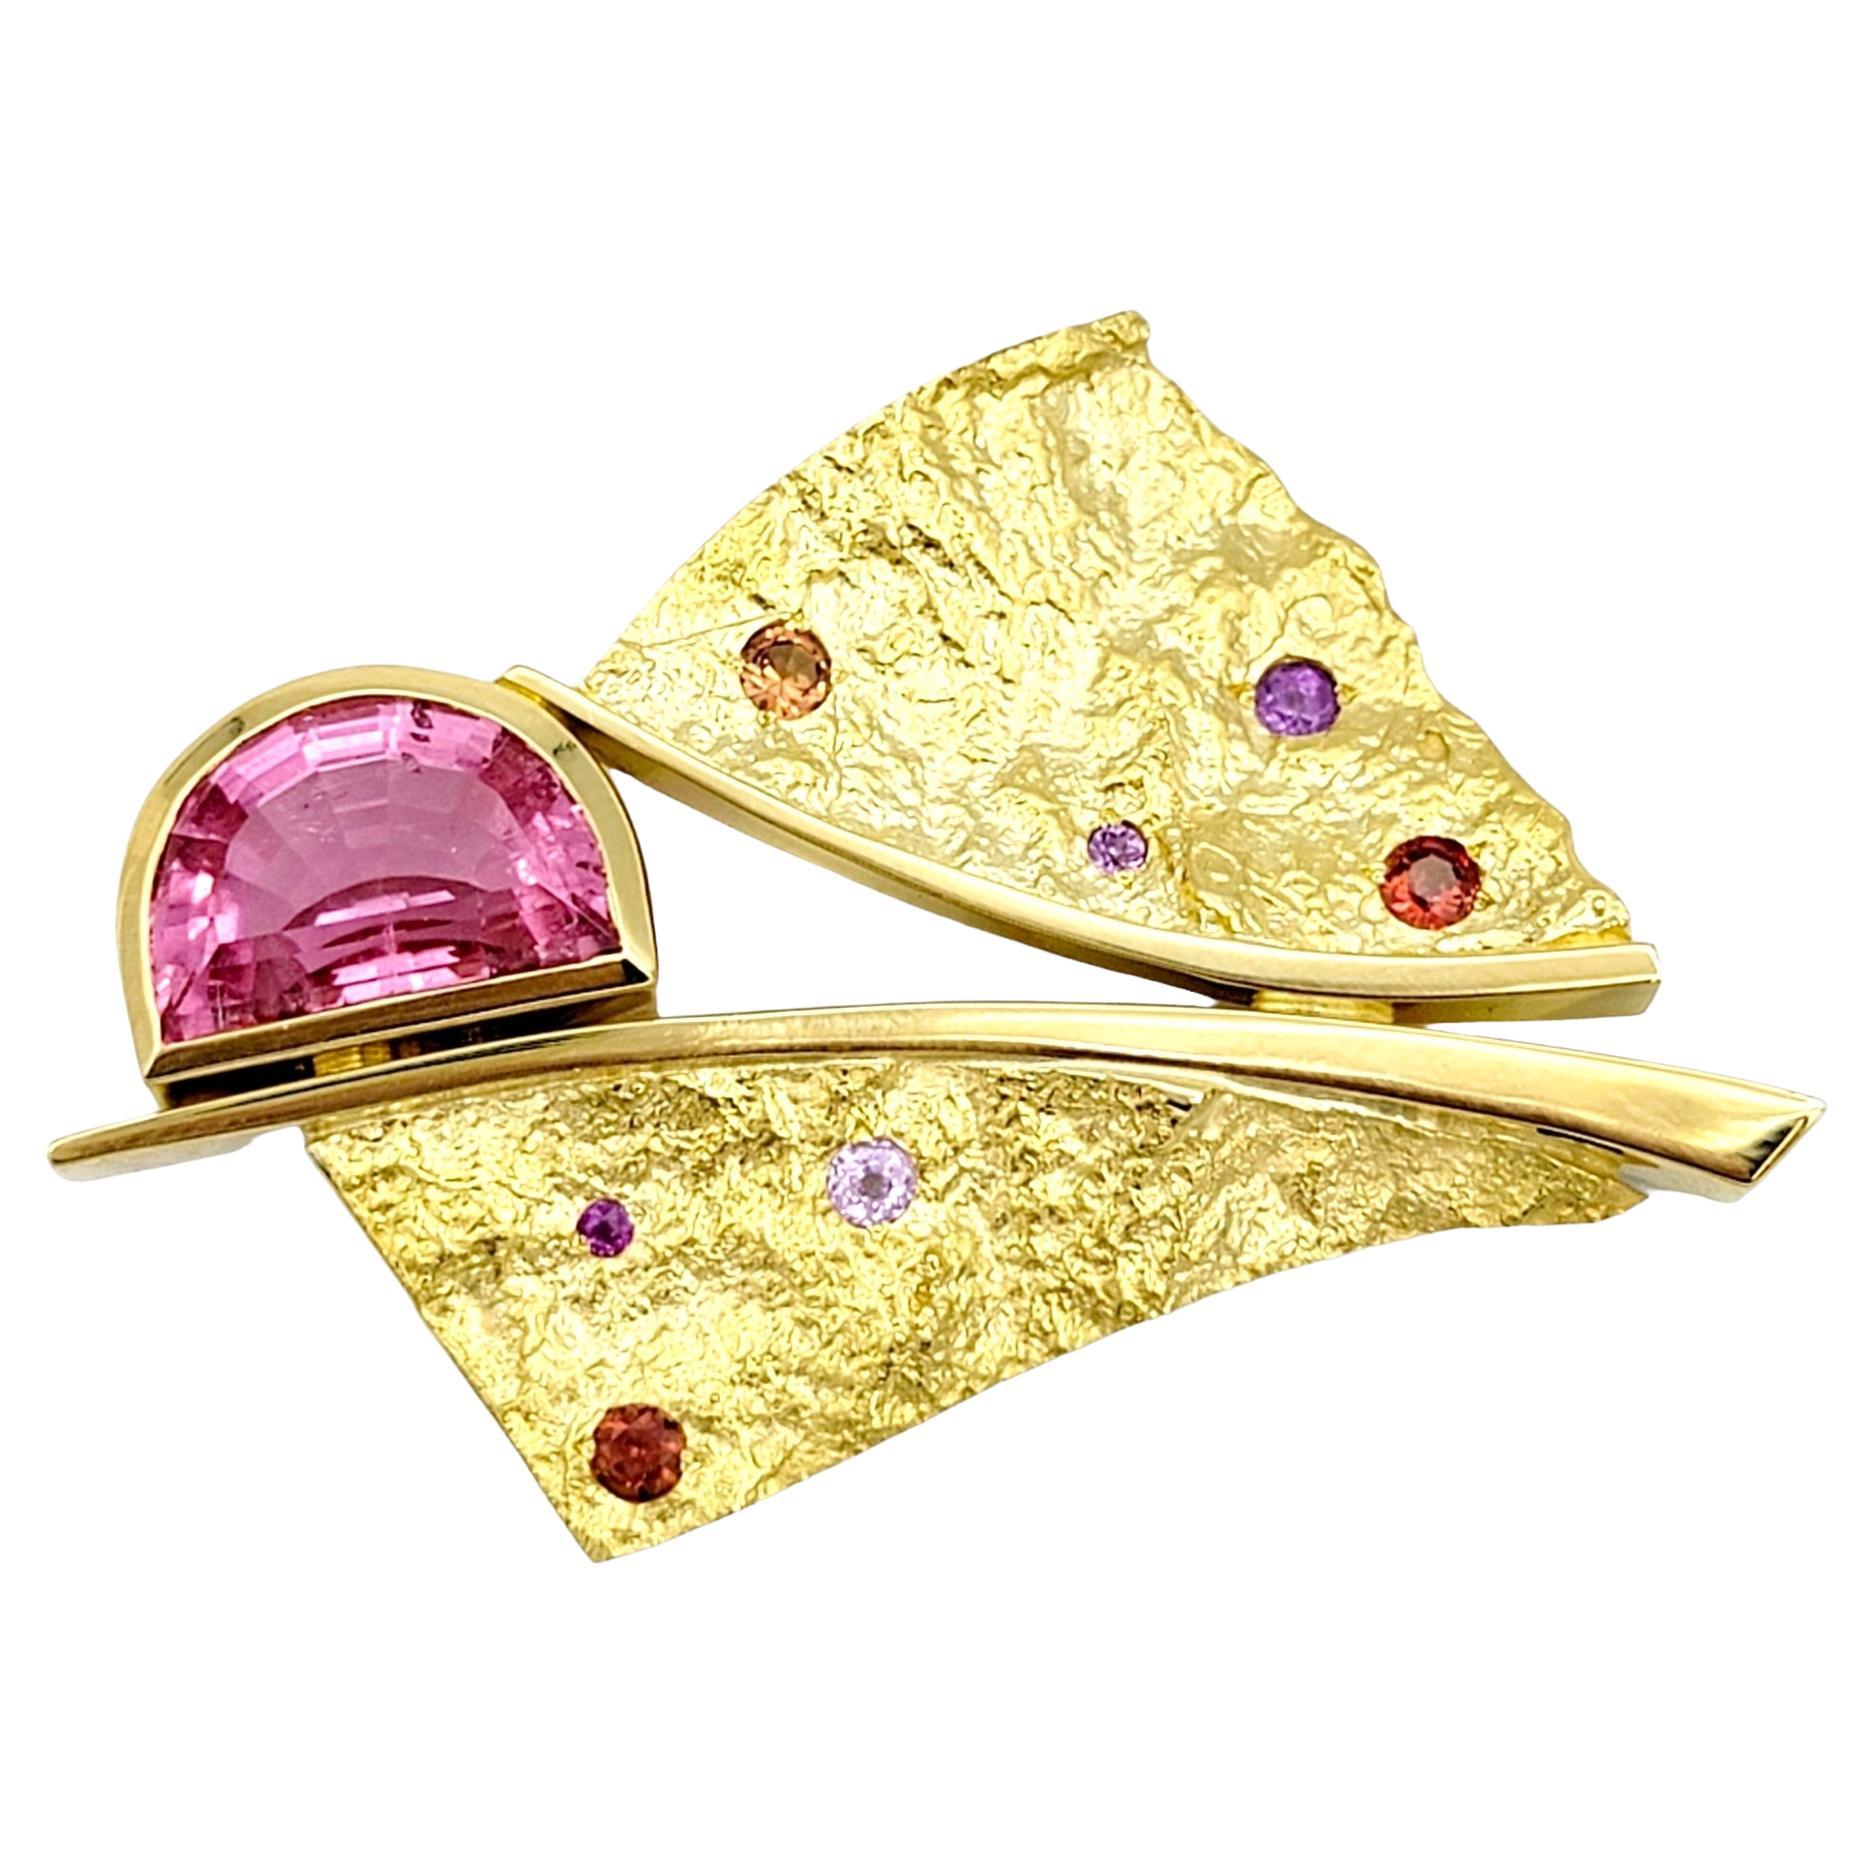 Susan Helmich Pink Tourmaline and Multi-Color Sapphire Brooch in 18 Karat Gold